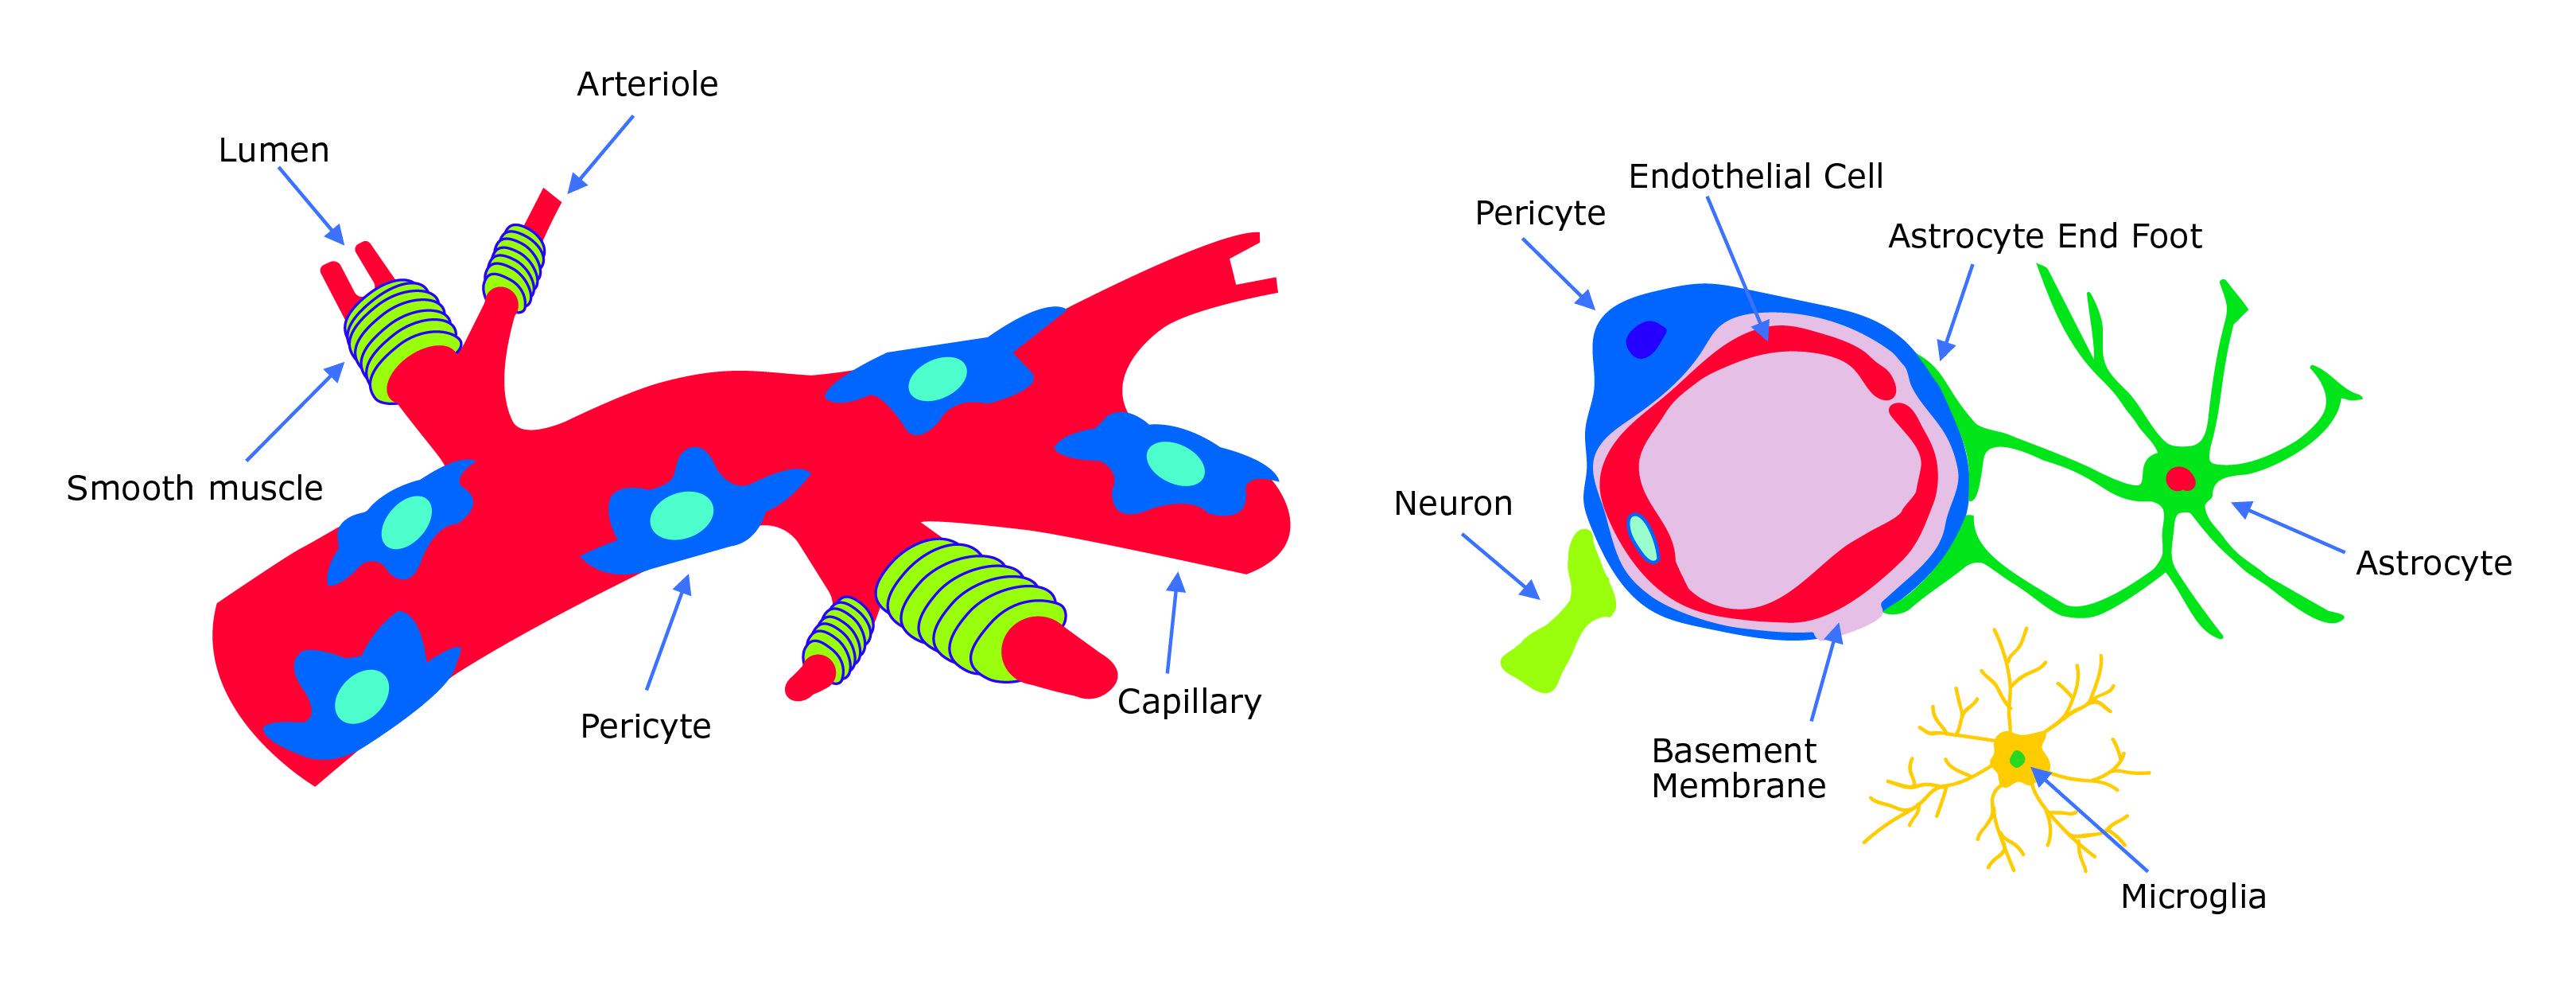 Vascular pericyte overview. Pericytes surround blood vessel capillaries and endothelial cells, neurons and astrocytes within the blood-brain-barrier (BBB) neurovascular unit.